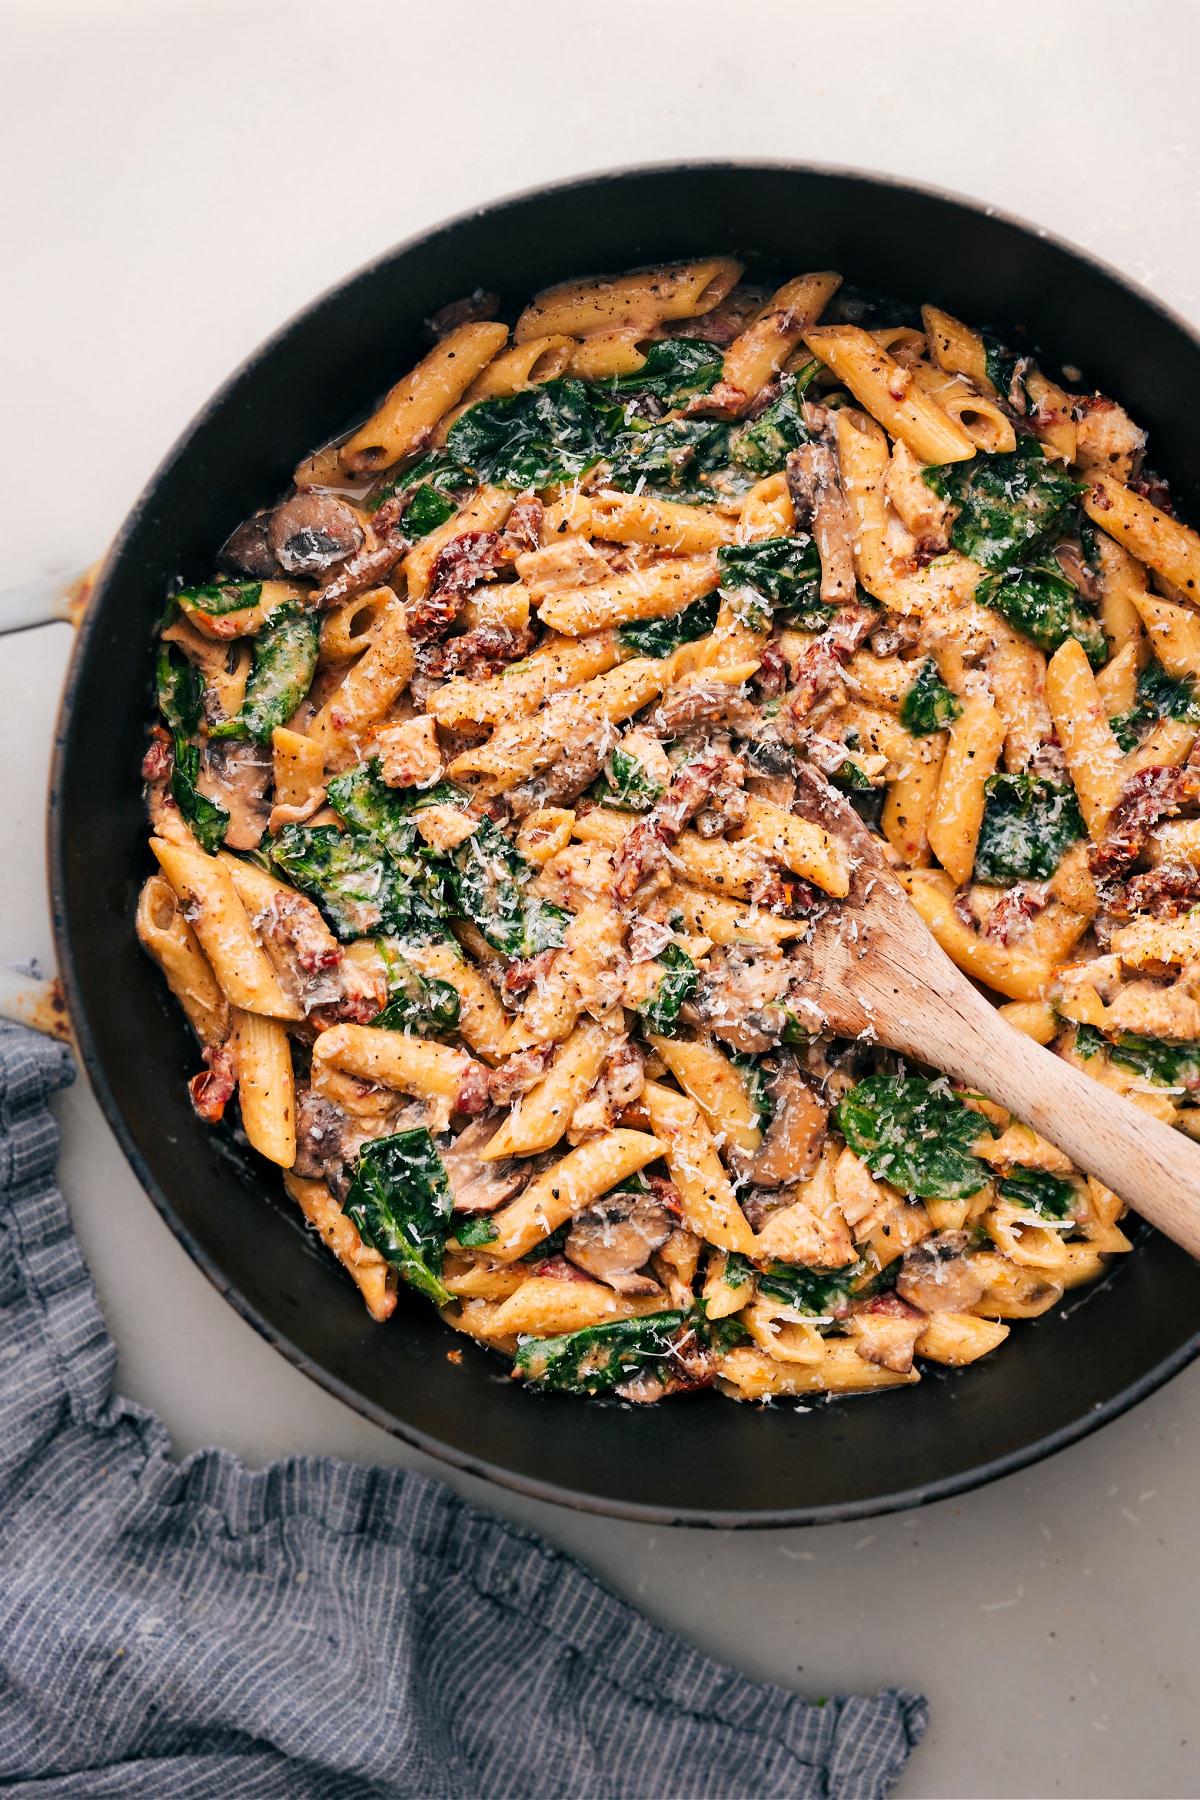 A pot of warm chicken penne pasta features melted cheese, sun-dried tomatoes, and fresh spinach, ready to be served.